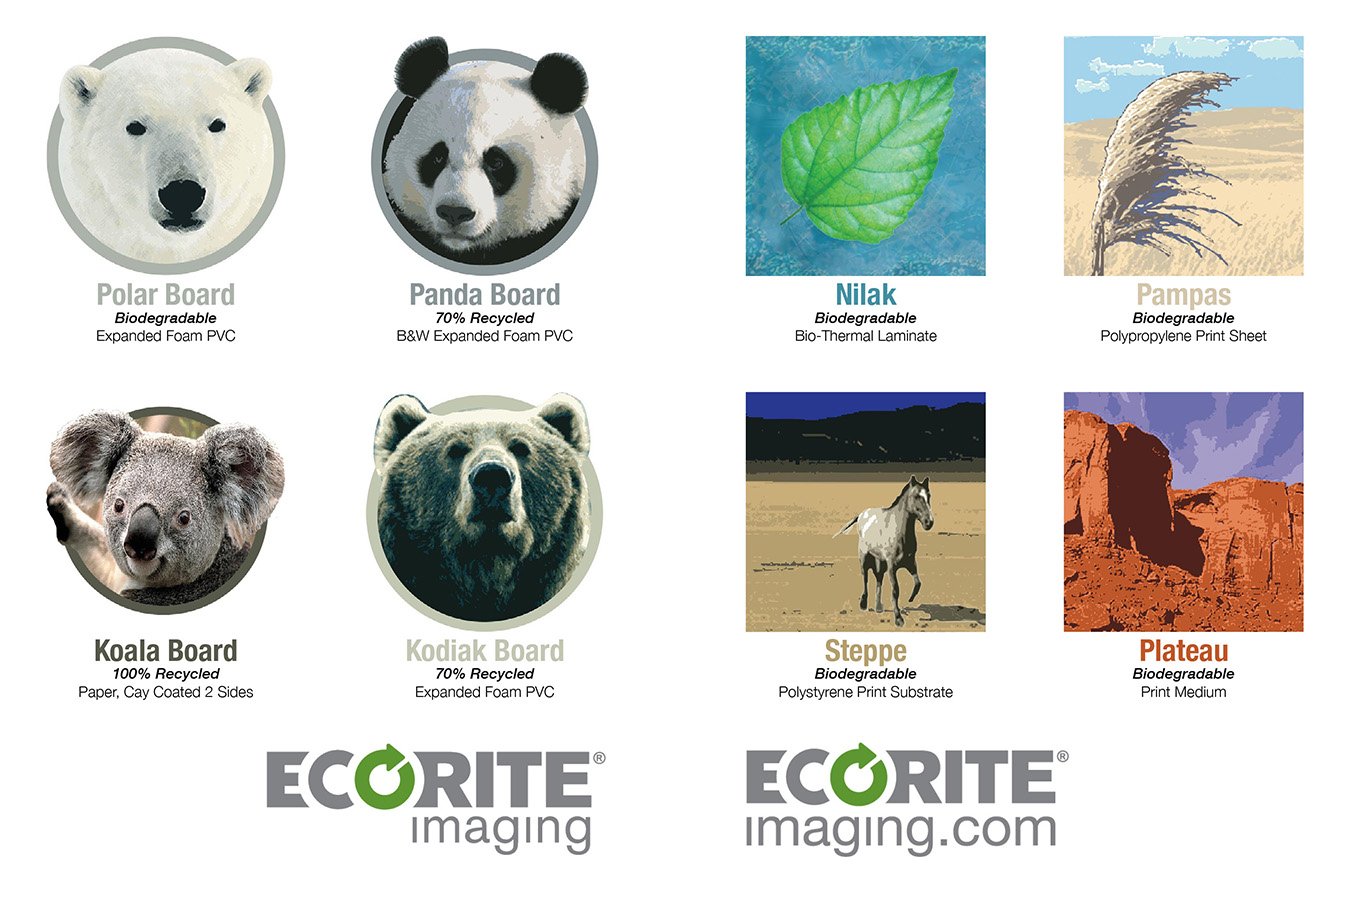 ecorite 9 : Microbes present in most environments break down biodegradable plastic into non-toxic solids, water and gas 